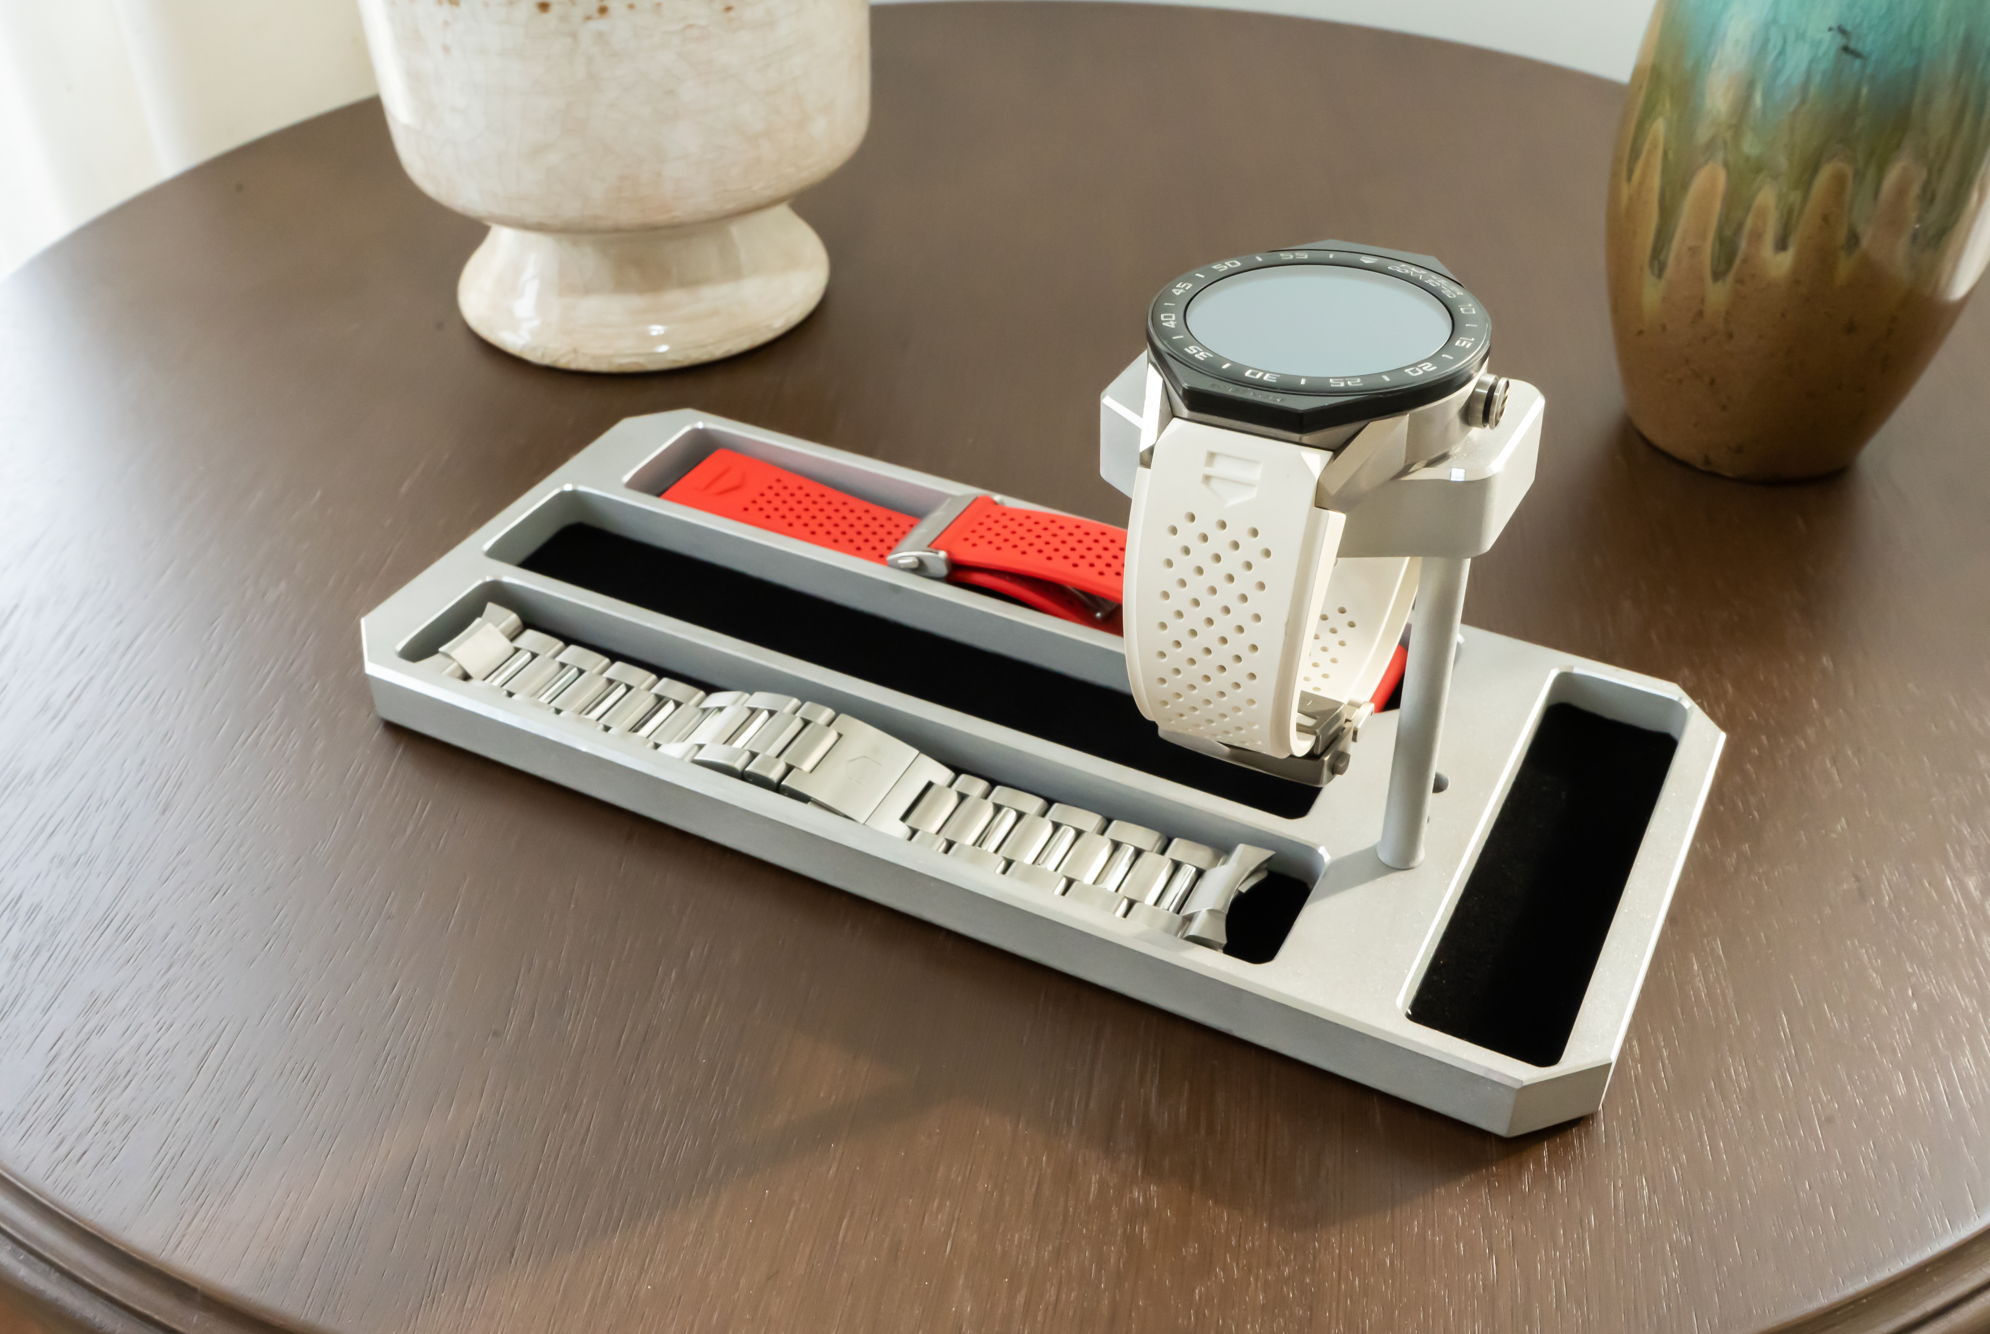 TAG Heuer Gen 2 Modular 45 Smartwatch Charging Stand (Strap Combo)